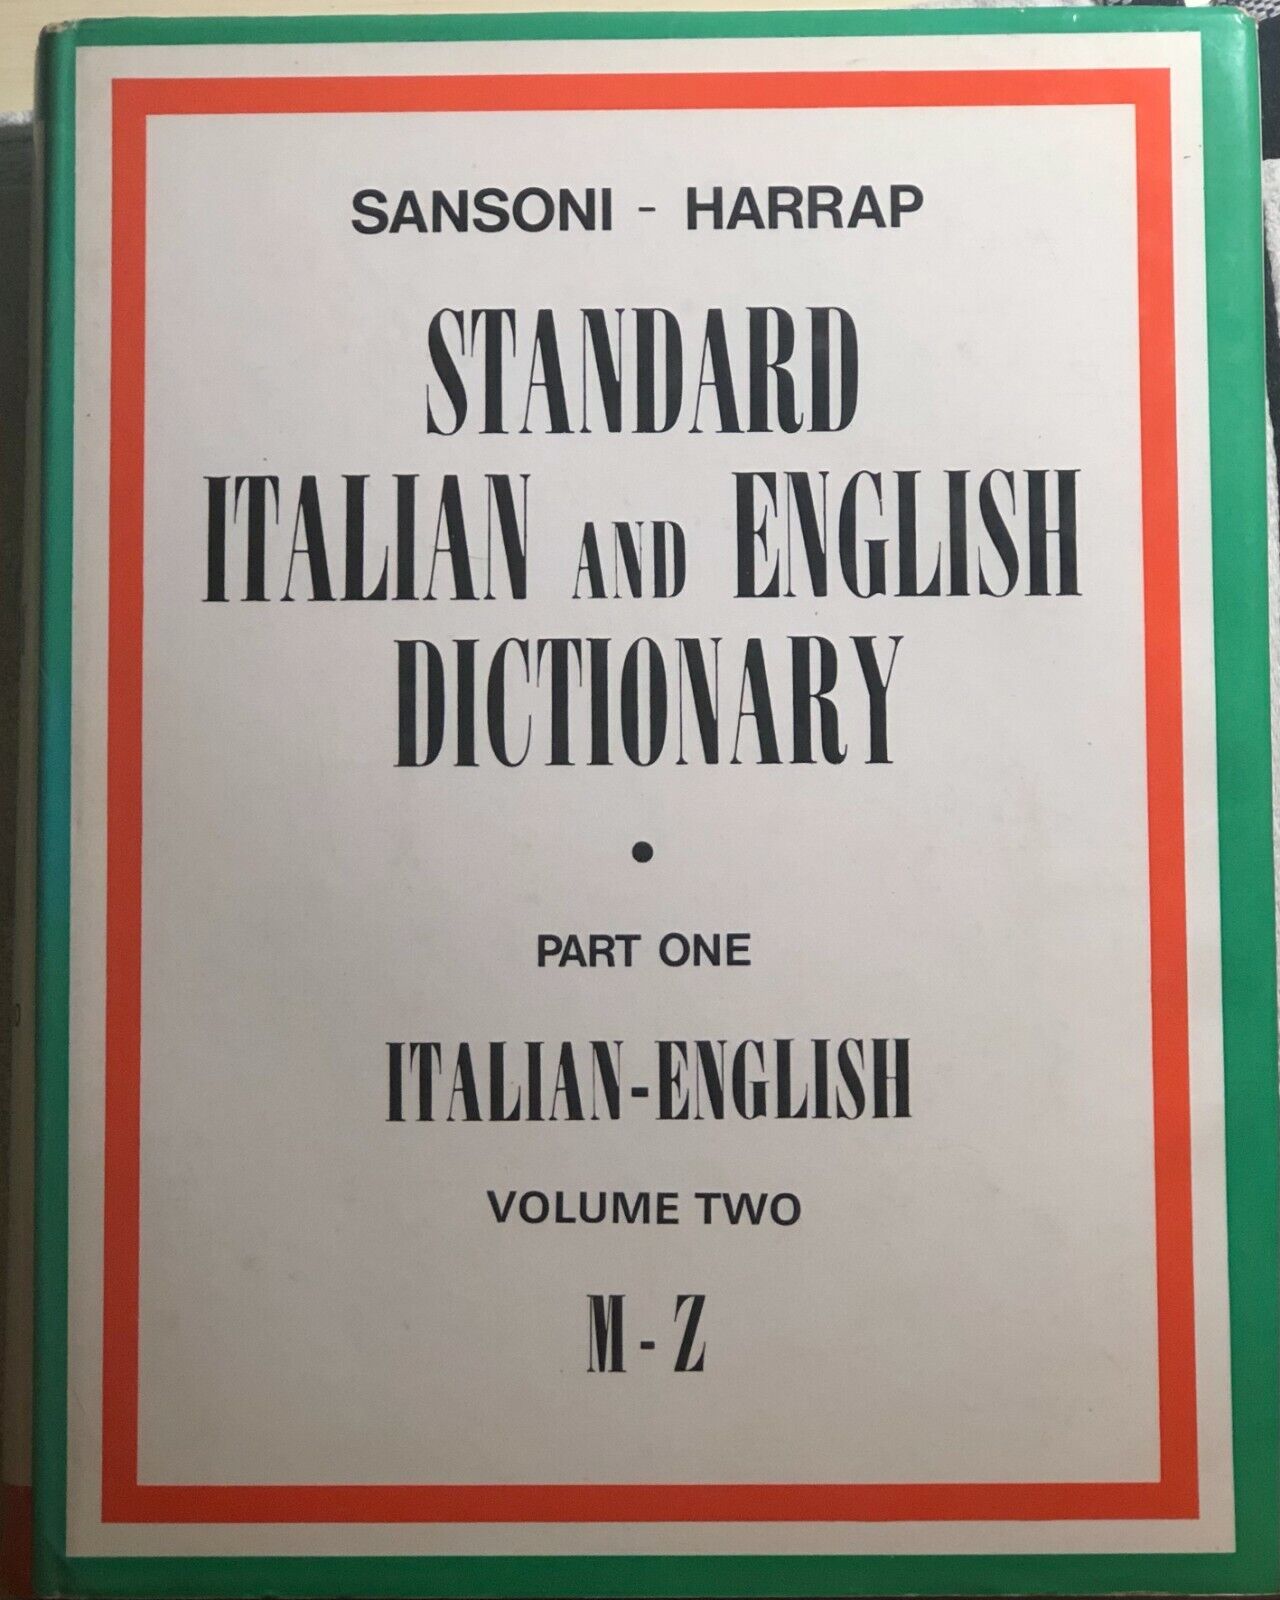 Standard italian and english dictionary Part one Italian-English Volume Two M-Z 